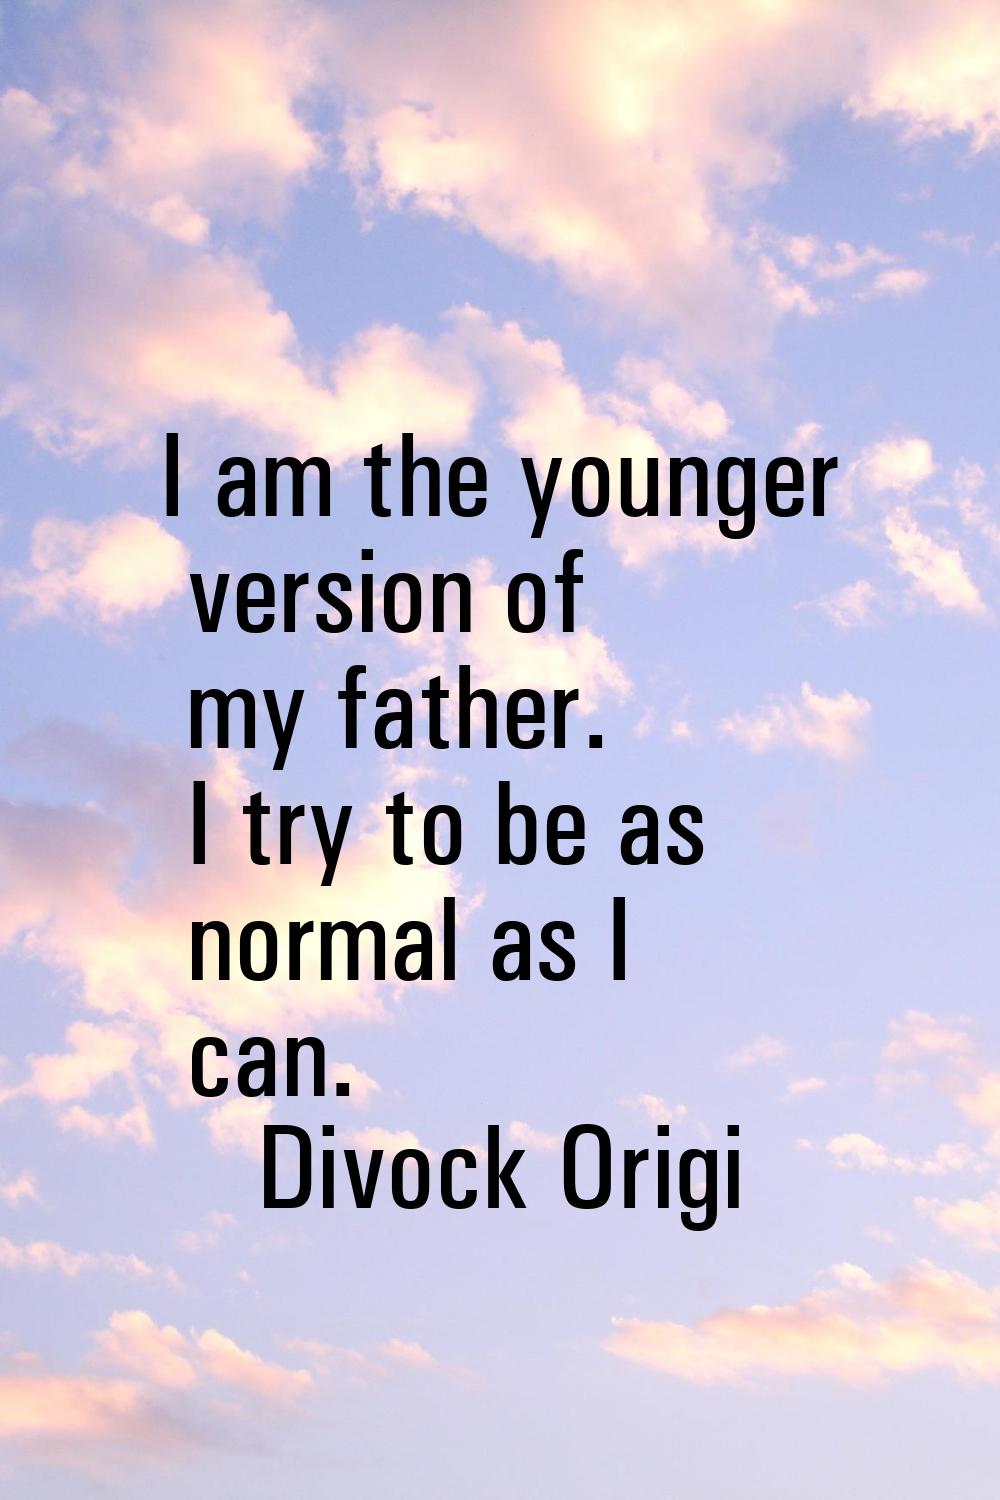 I am the younger version of my father. I try to be as normal as I can.